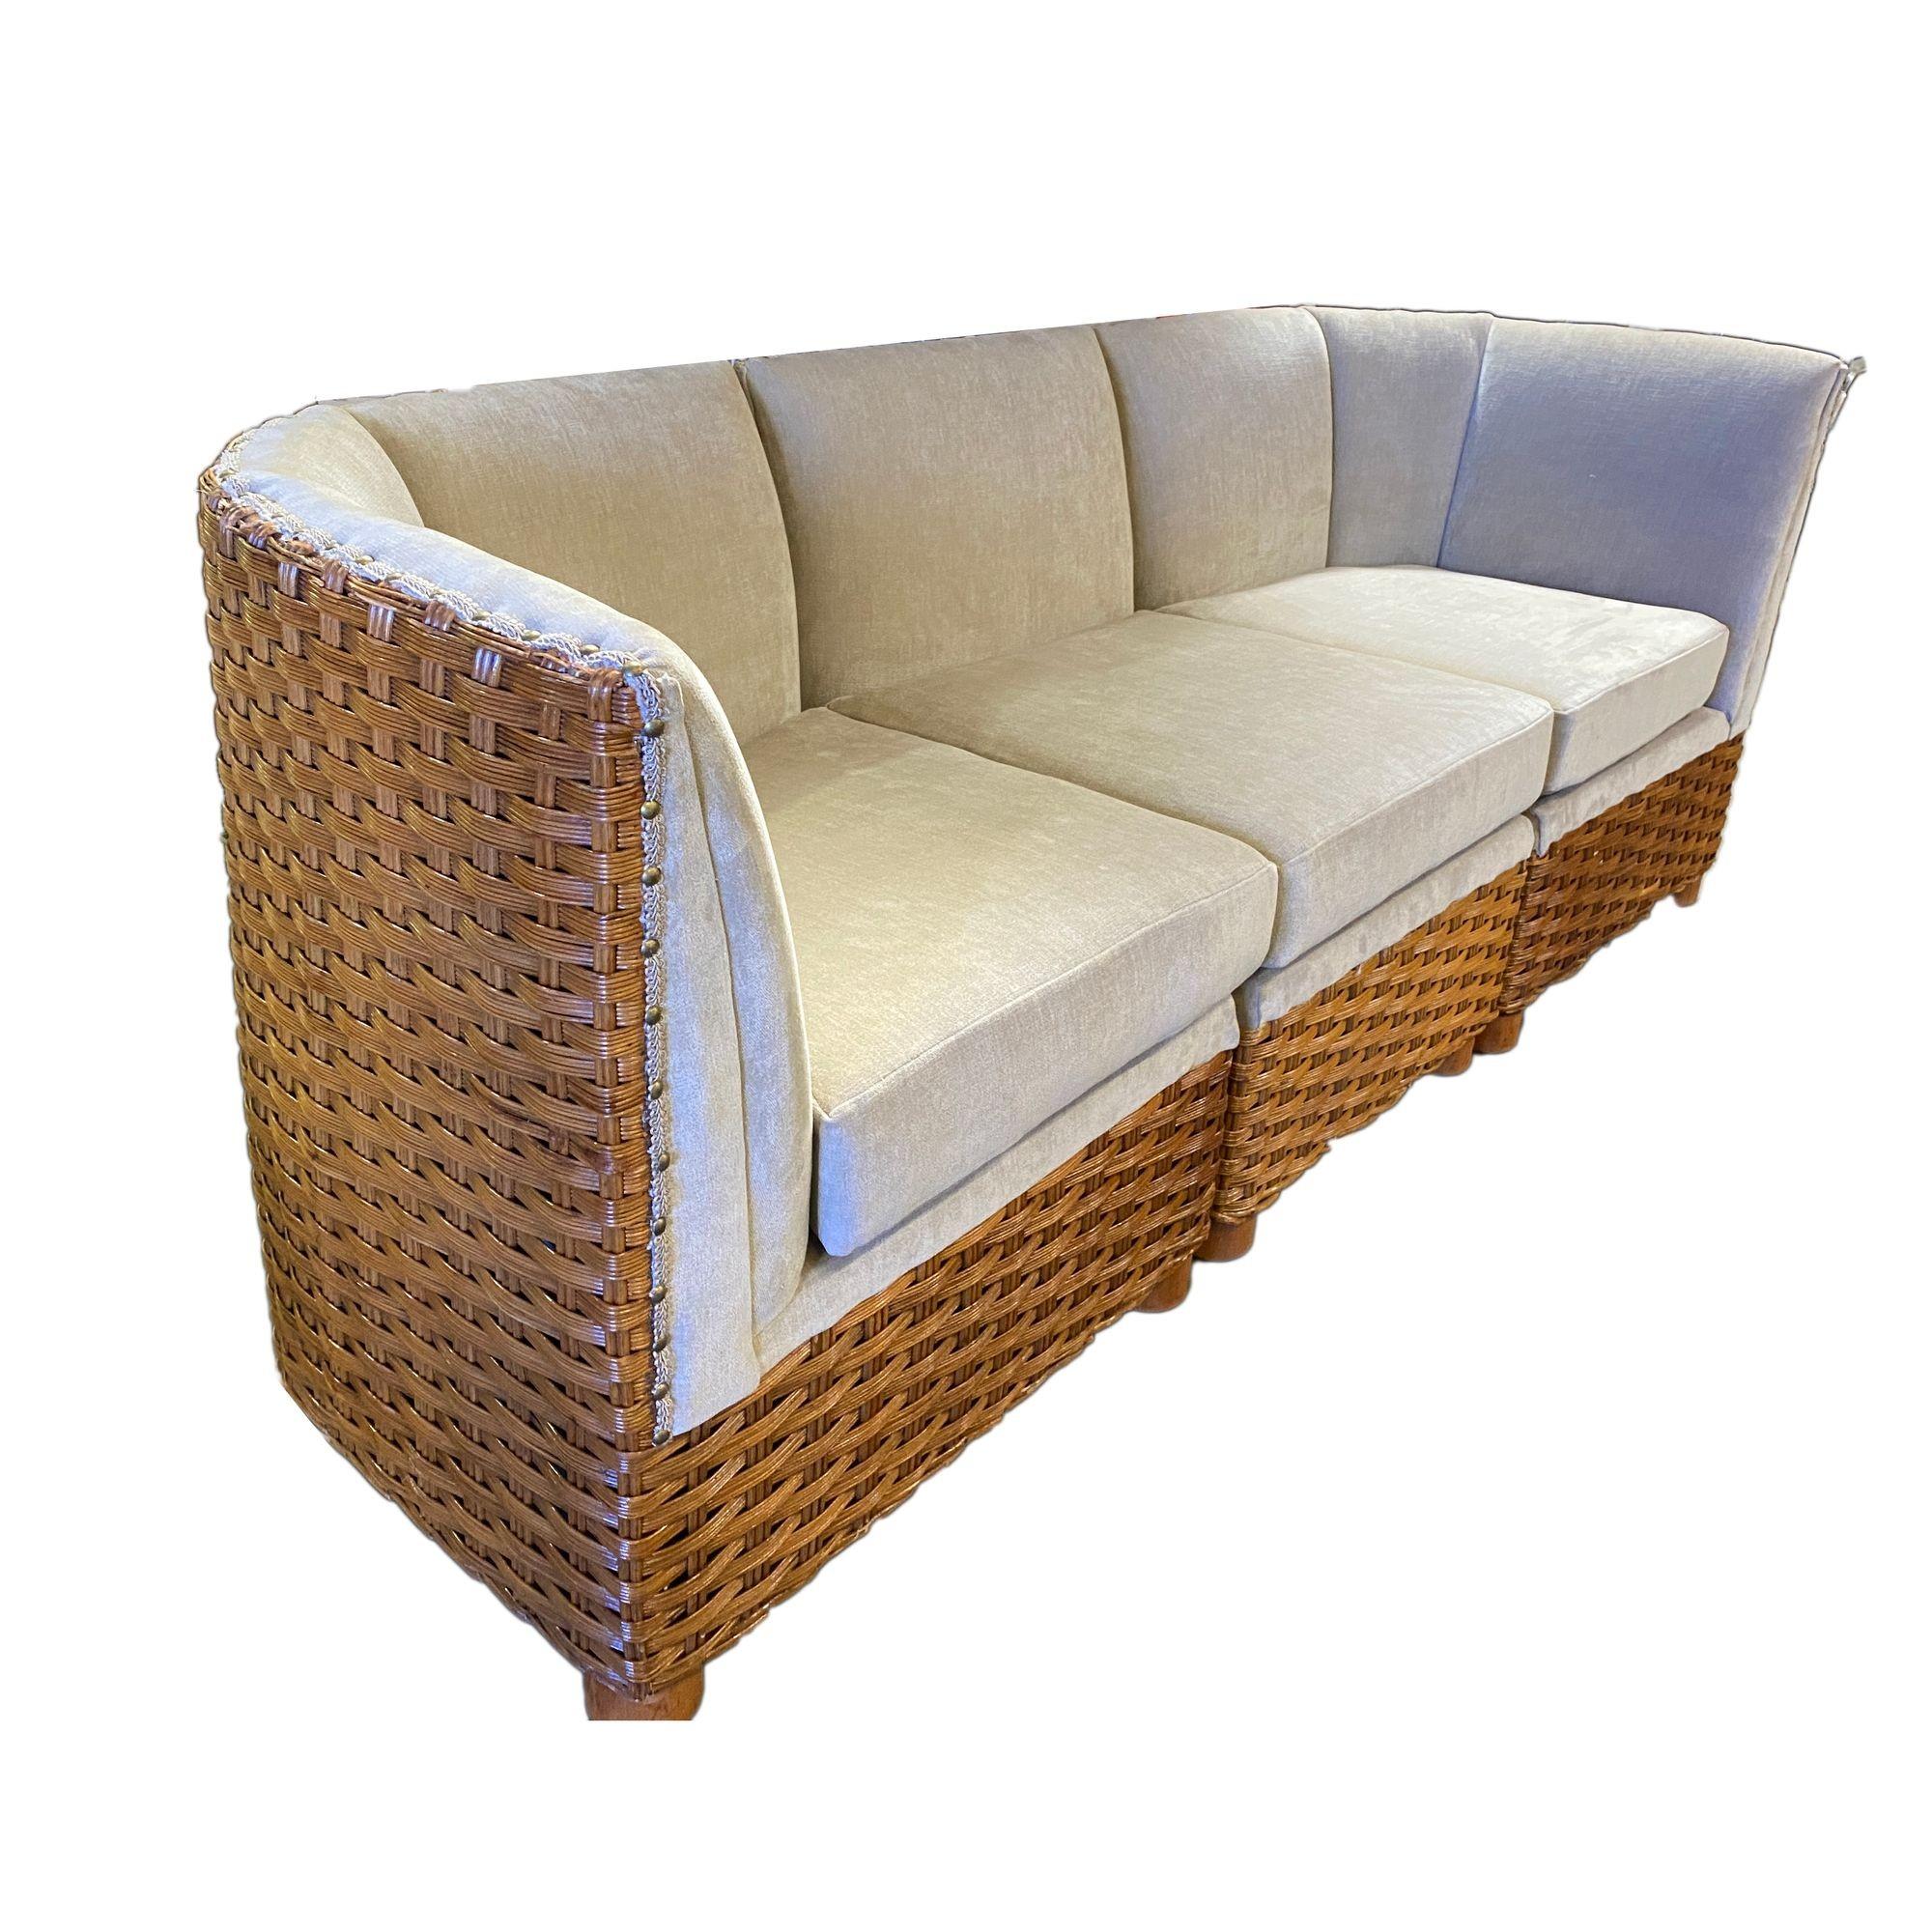 Original pair of 1950s sectional woven wicker dinner booths each featuring a woven wicker body into 3 different sectional pieces. Each piece feature hand-woven wicker forming an oversized back with a new white textured broad cloth finish with brass